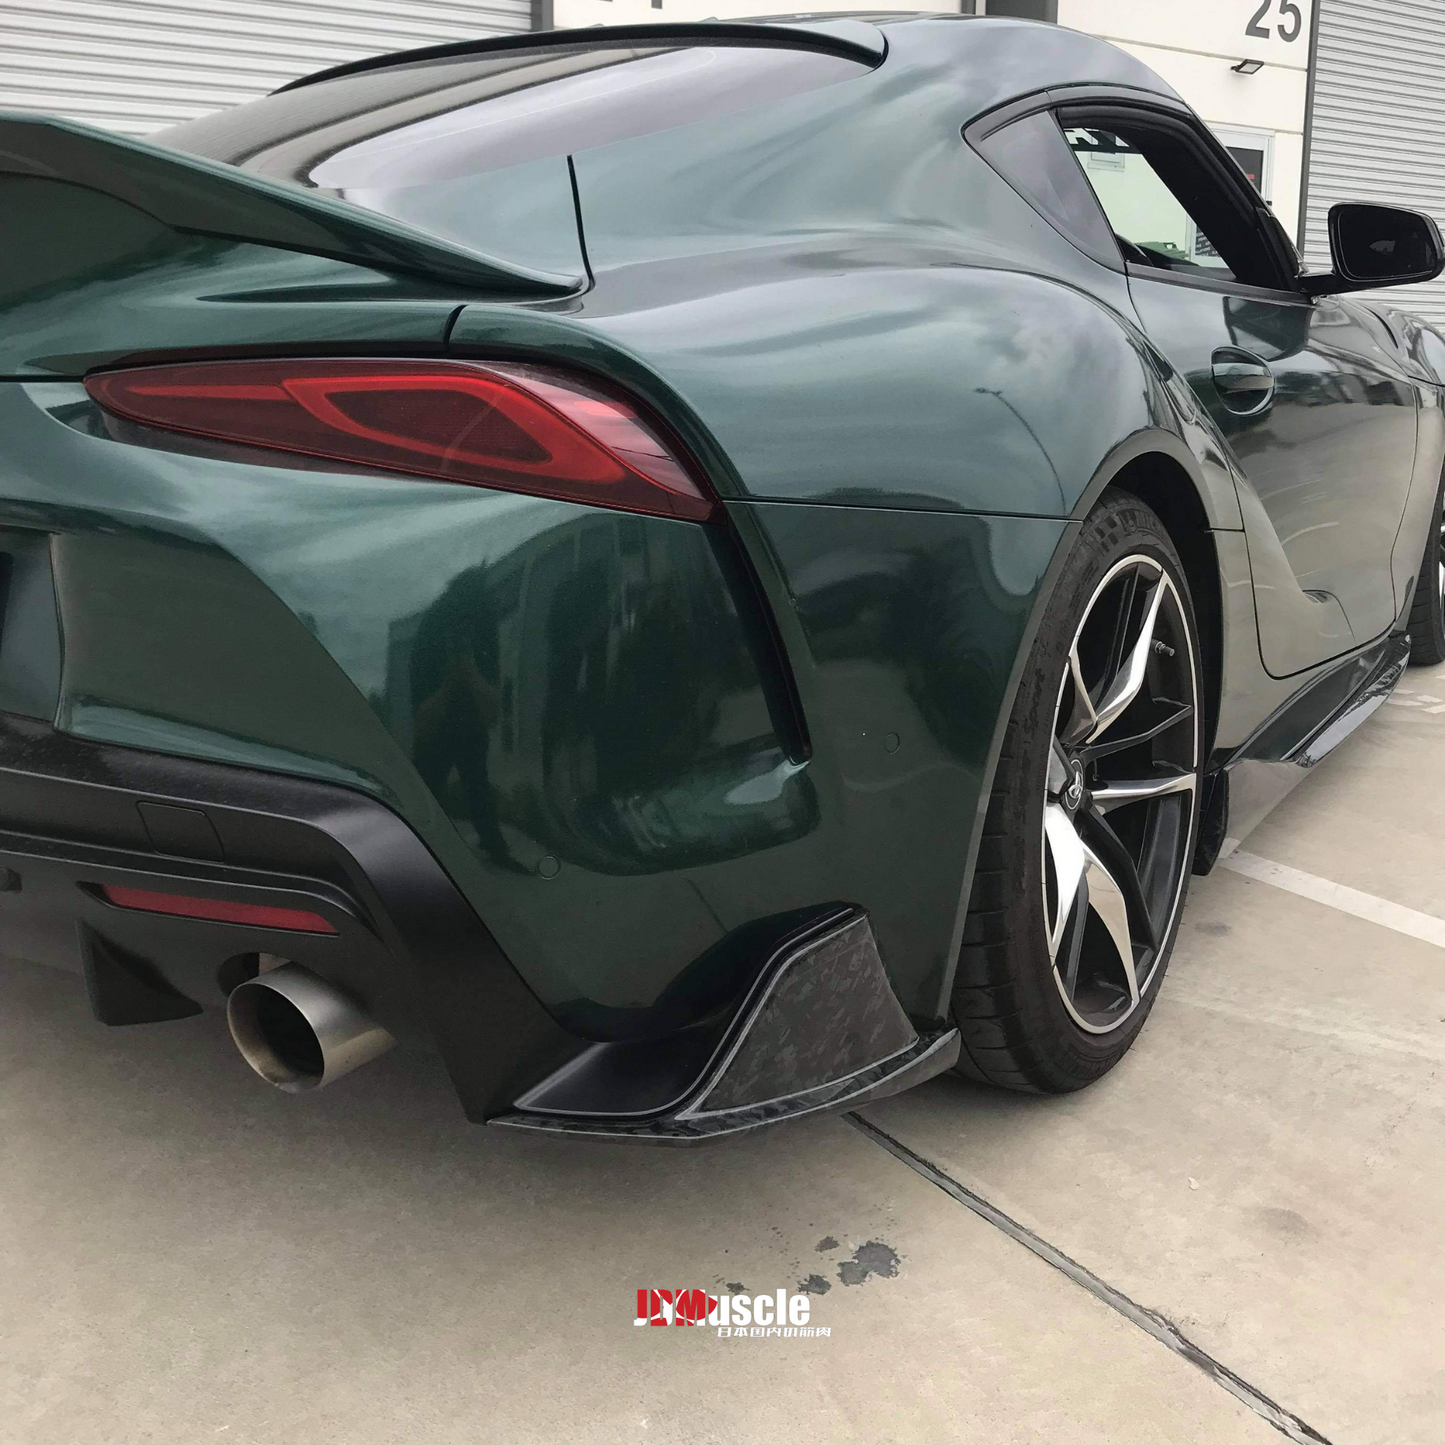 JDMuscle Tanso Carbon Fiber VS Style Rear Spats for 2020+ Toyota Supra